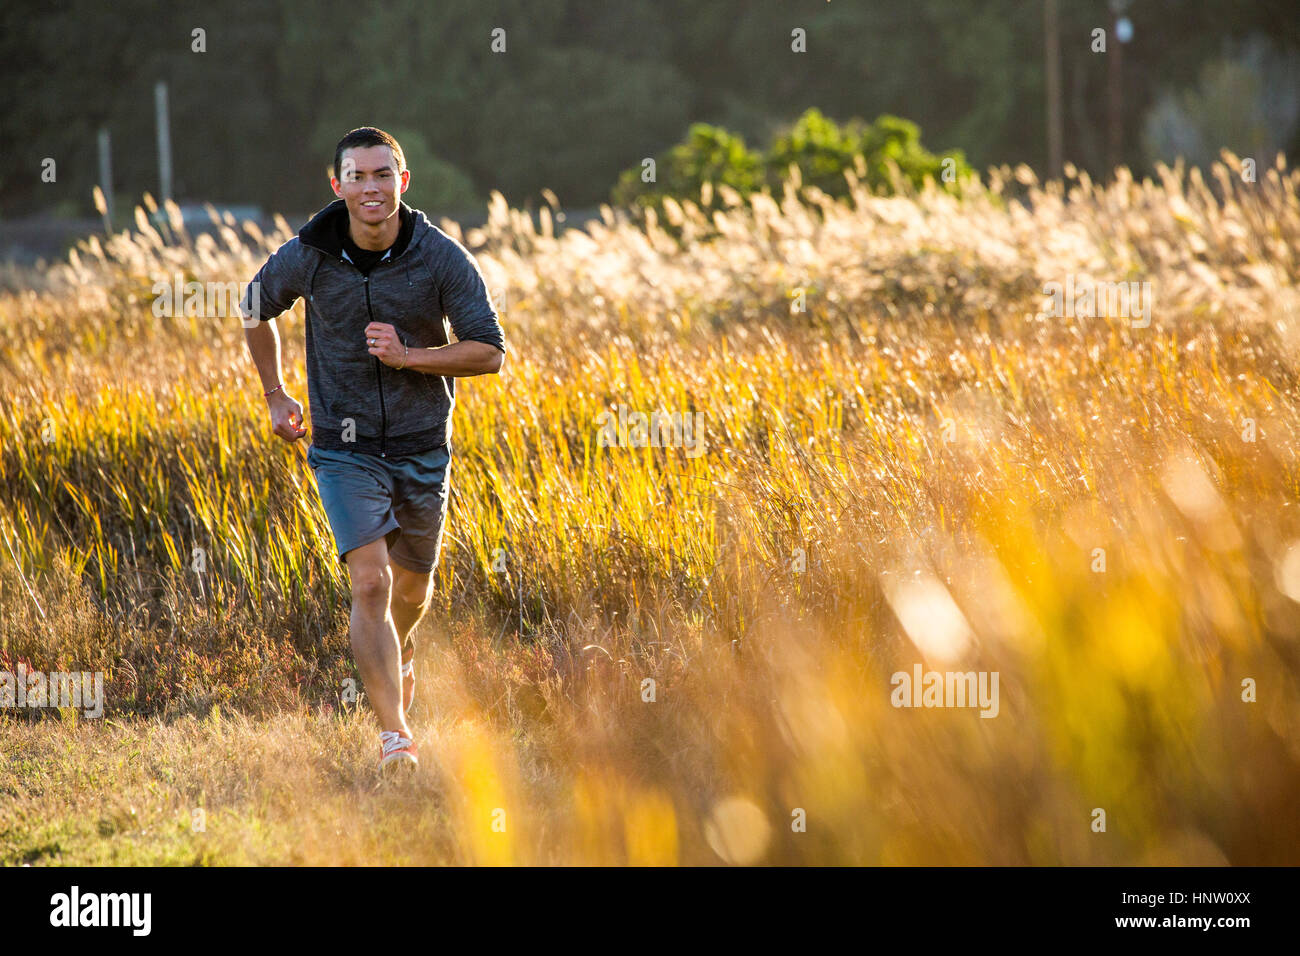 Smiling Mixed Race man running in field Stock Photo